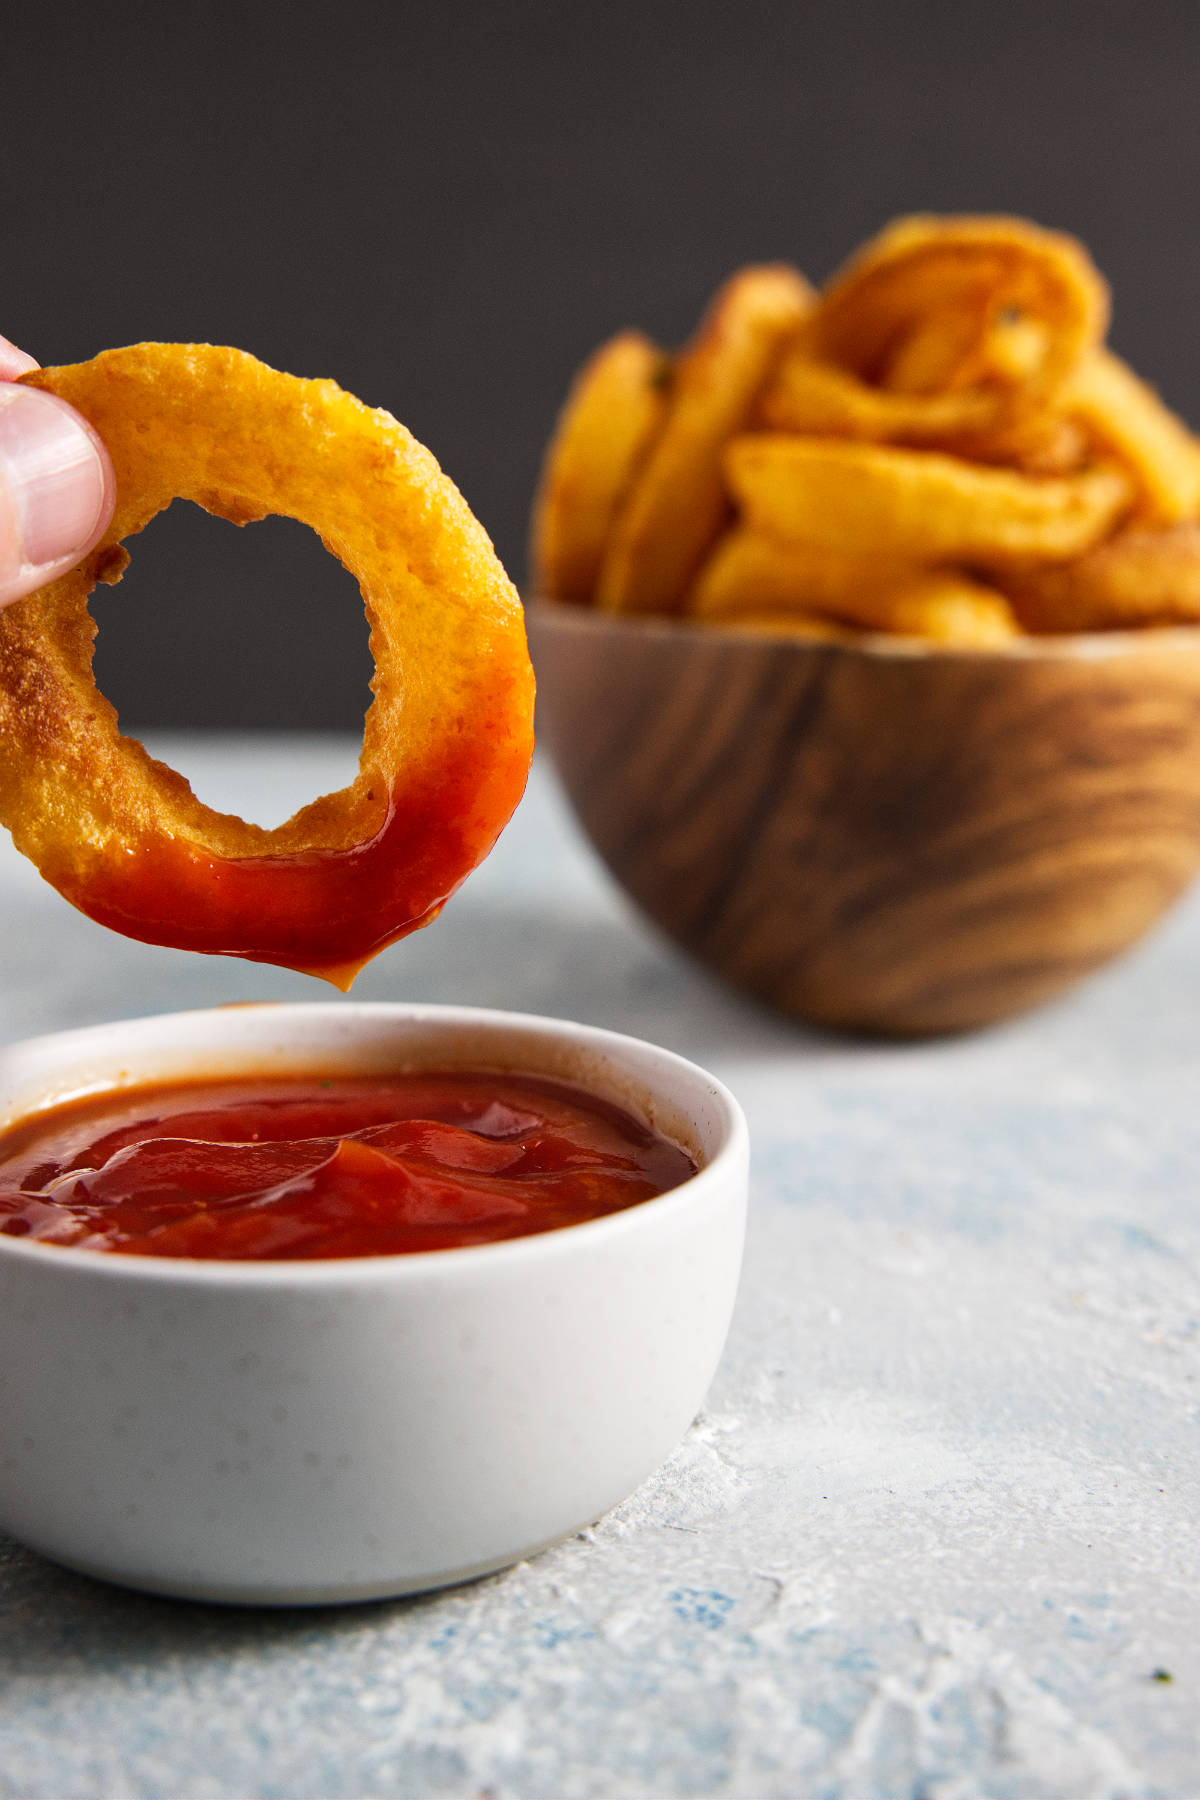 Onion ring being dipped into ketchup with wooden bowl of onion rings in background